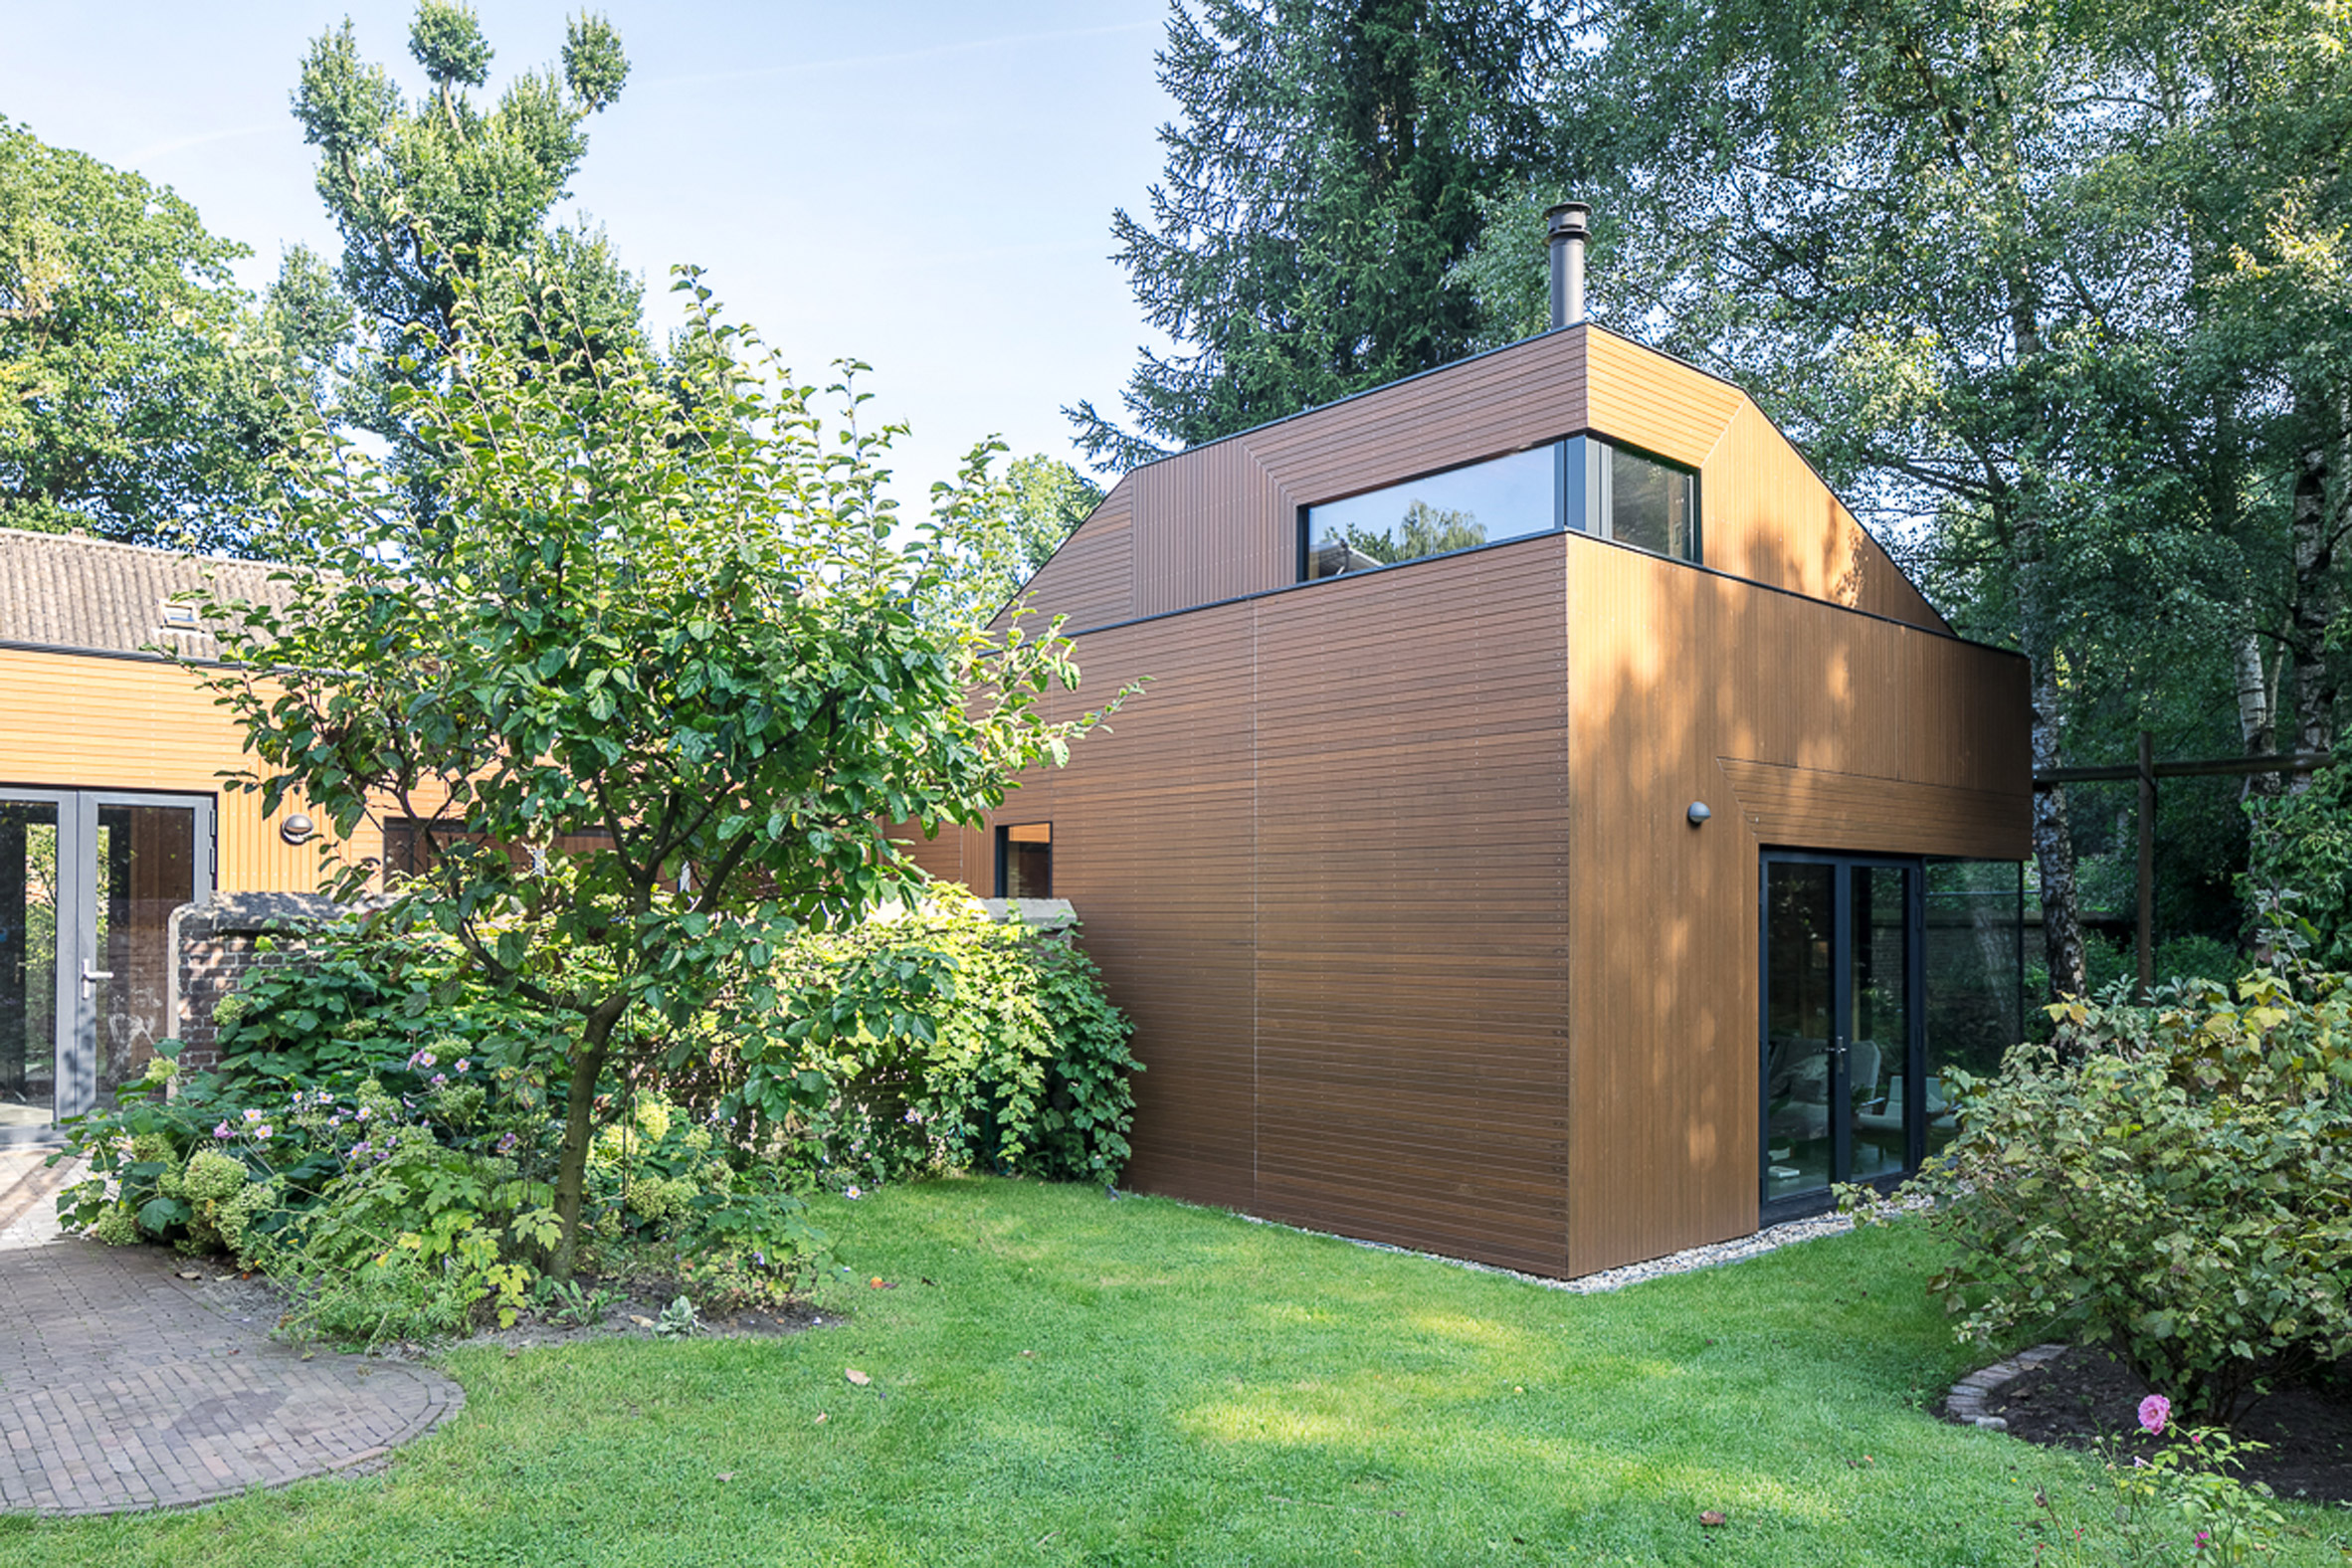 An ancient monastery wall slices through this Utrecht house extension